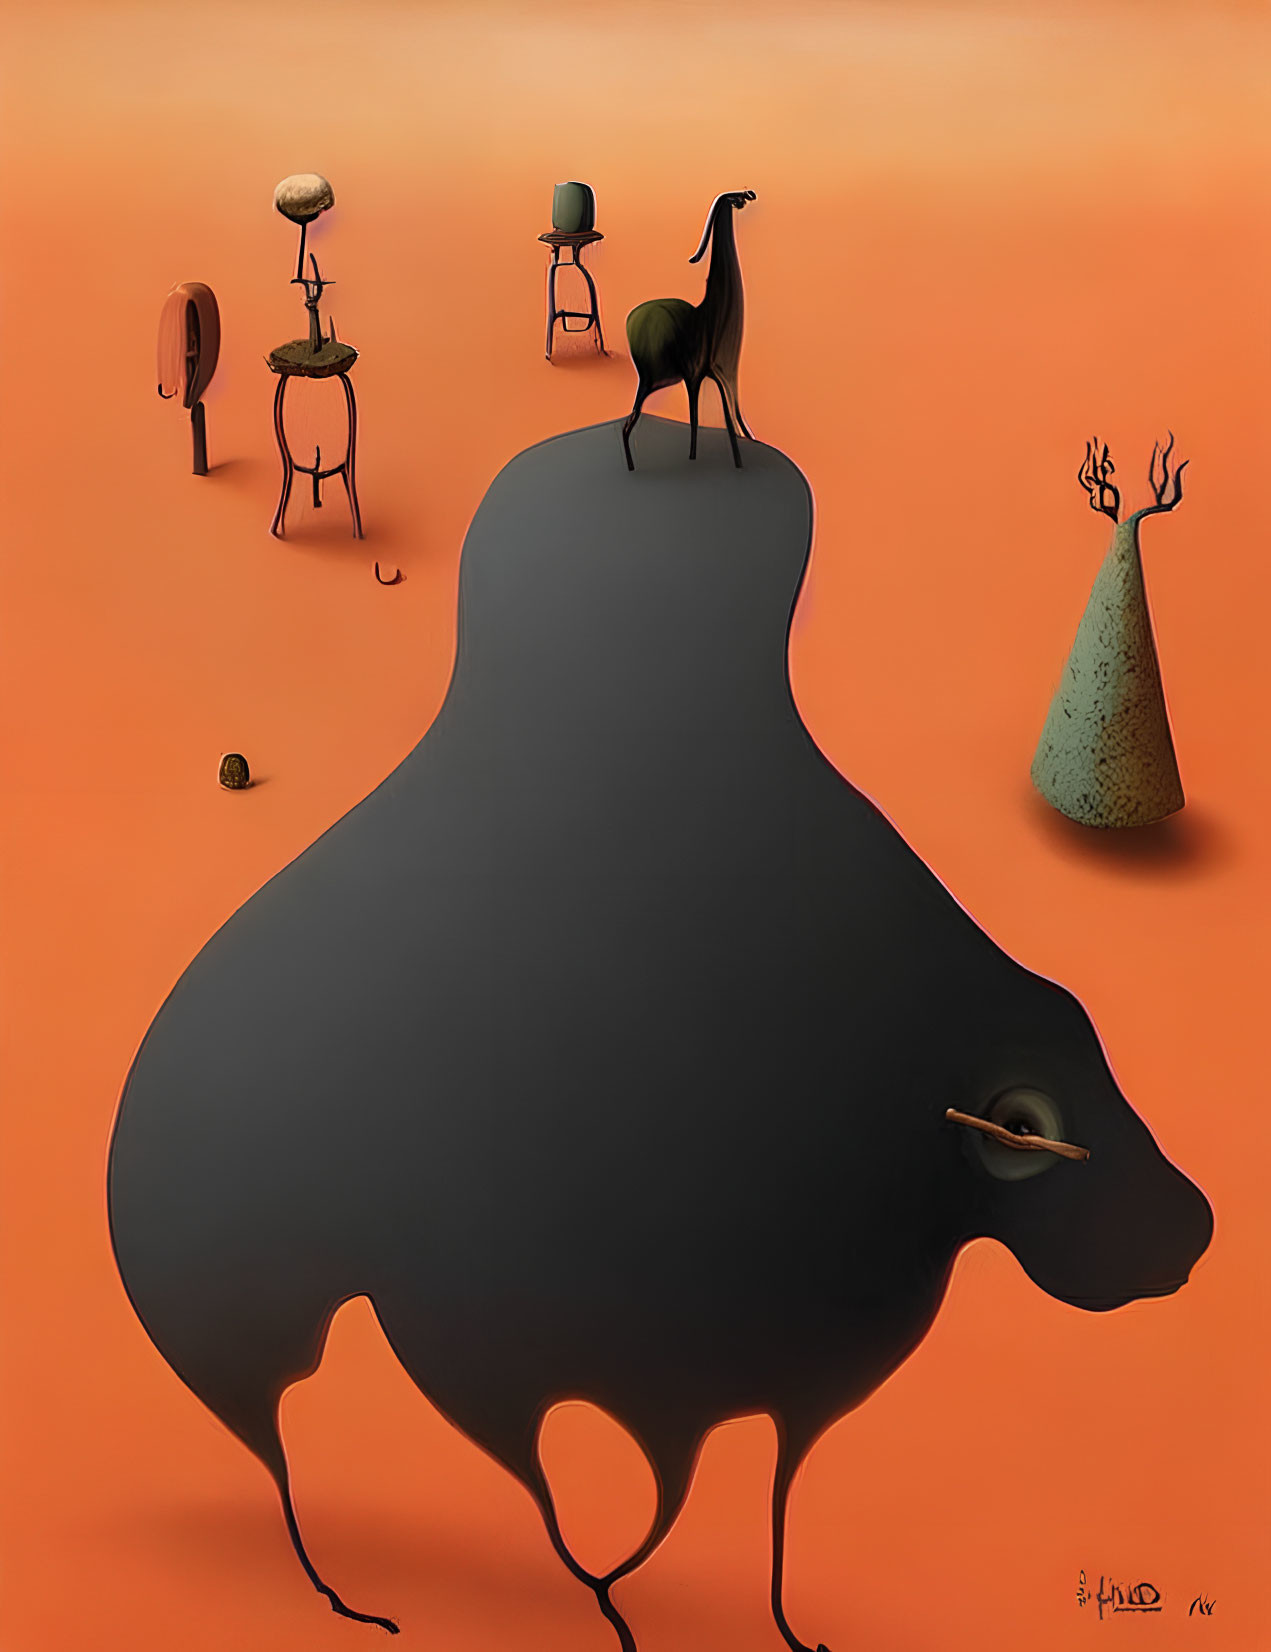 Surreal artwork featuring shadowy pear-shaped figure, chairs, creature on cone-shaped hill, against